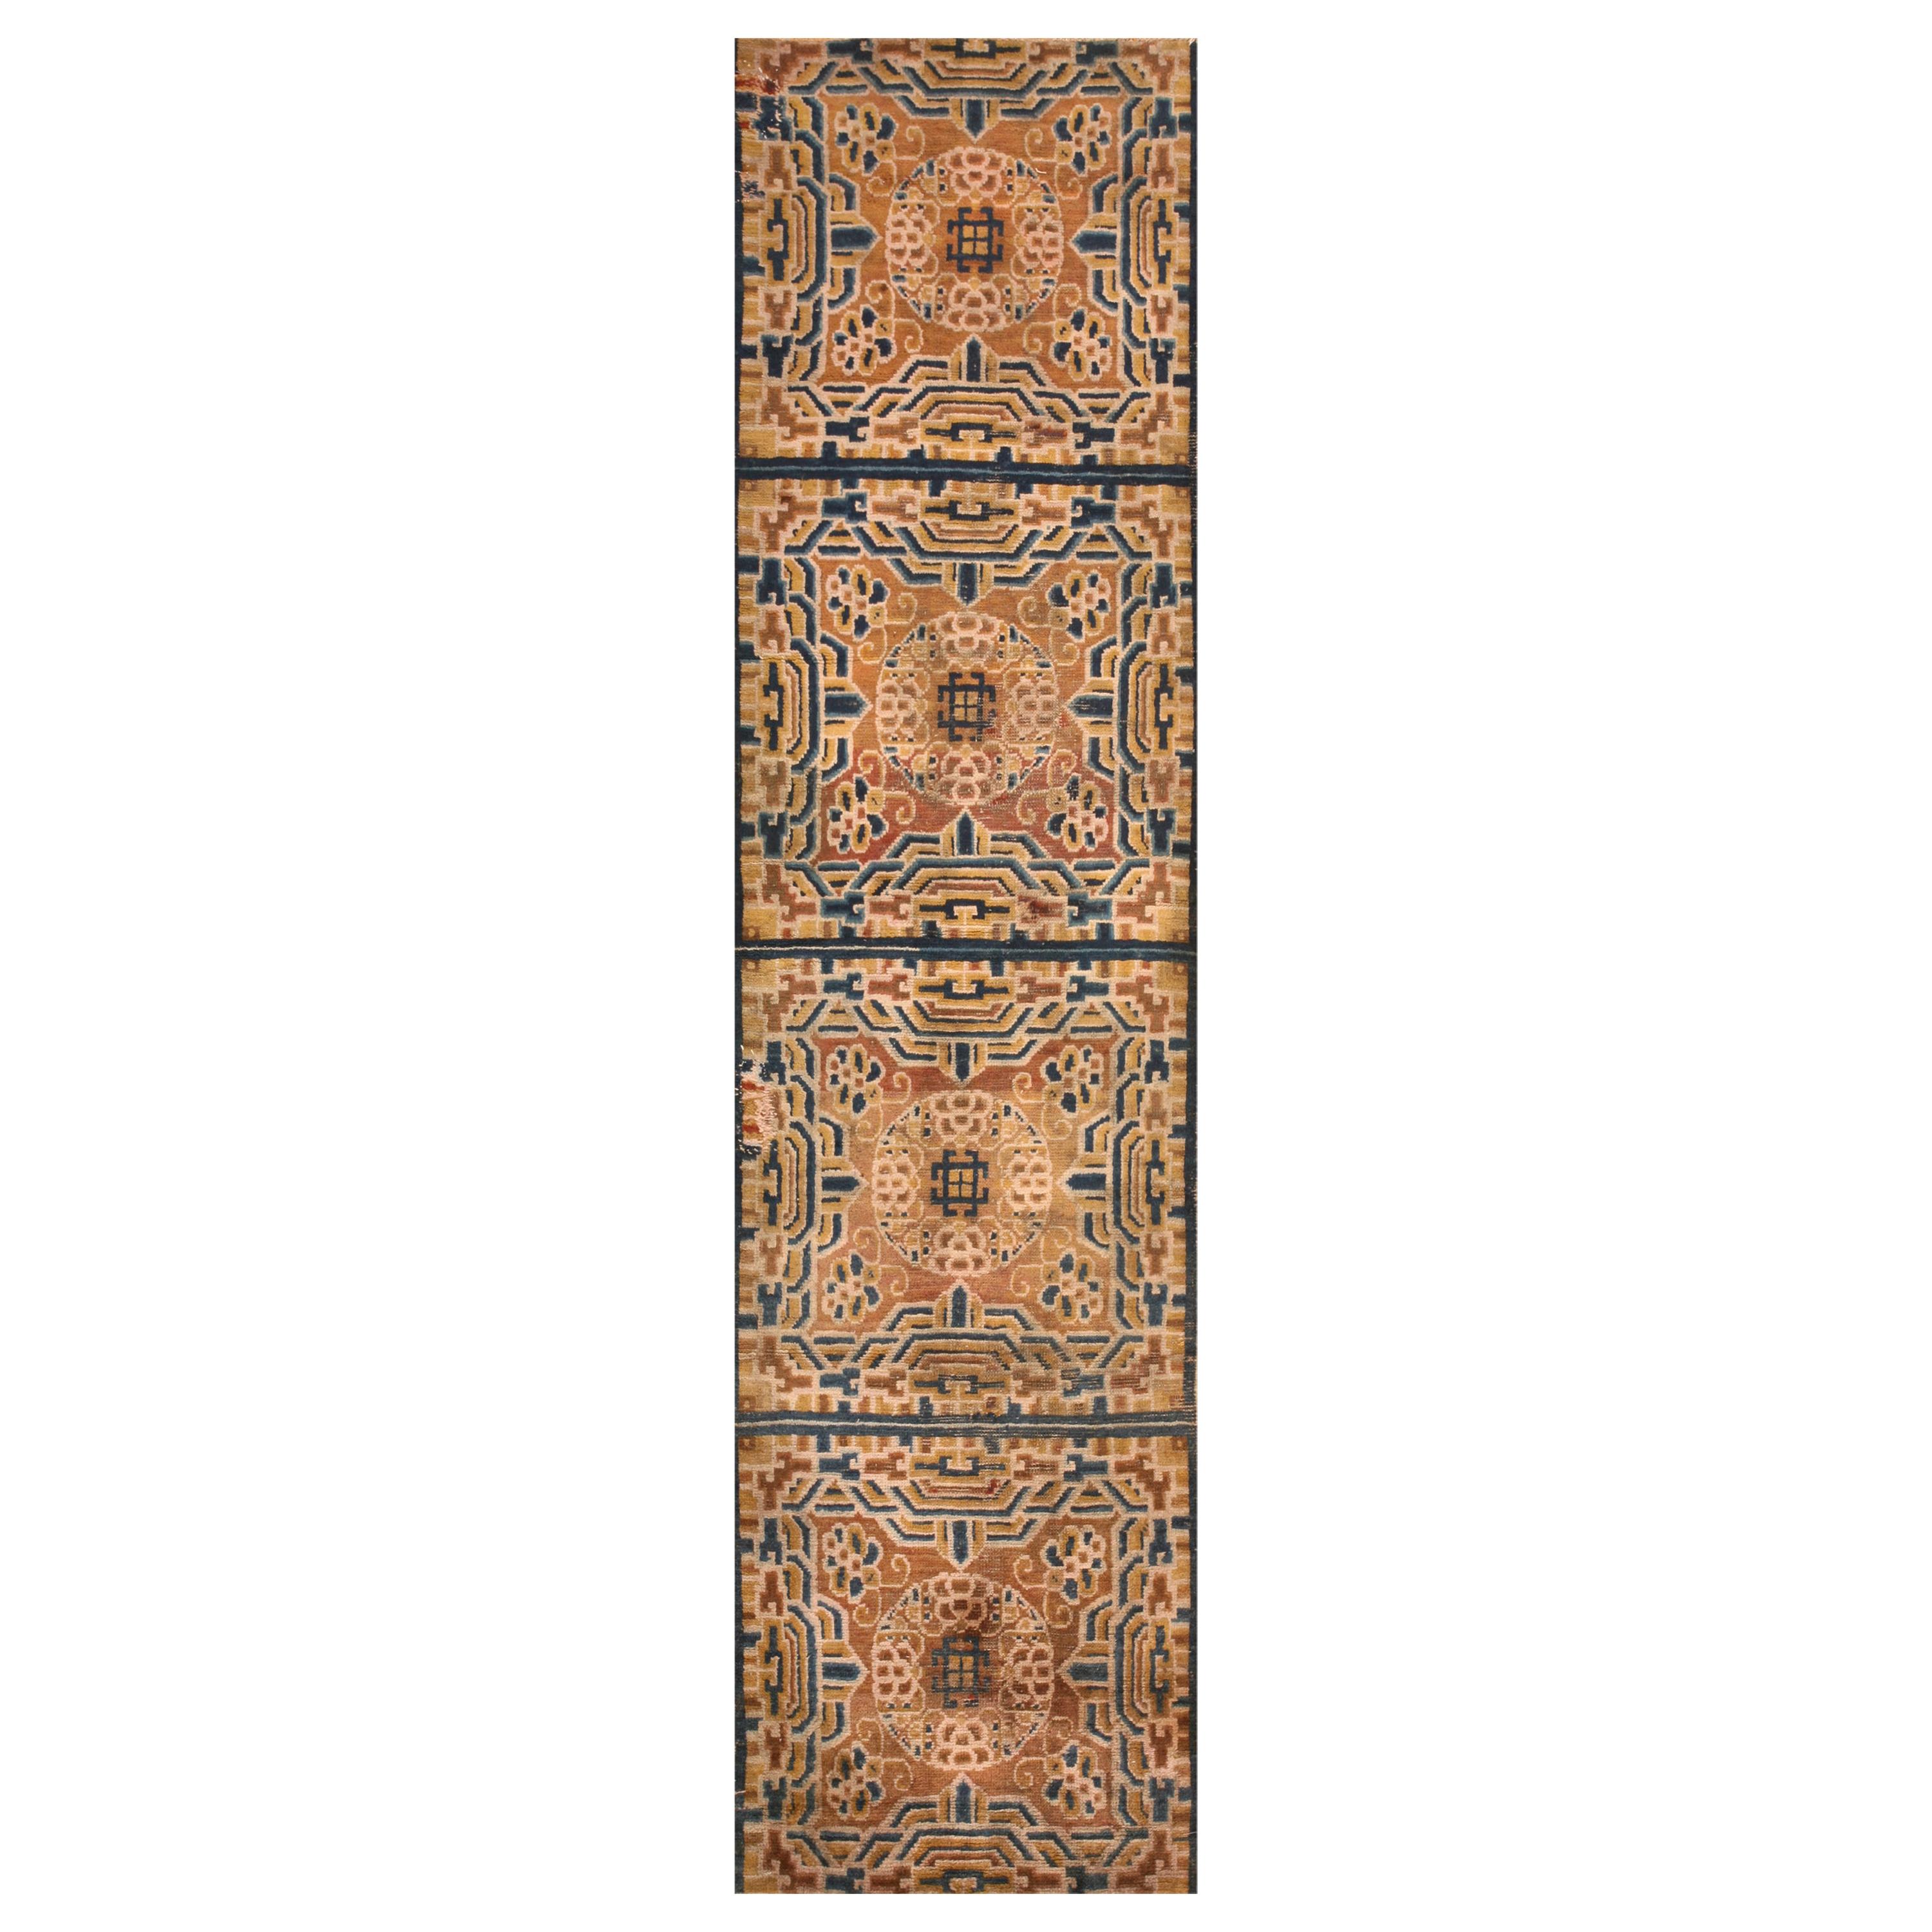 Late 19th Century Chinese Ningxia Carpet ( 2'4" x 9' - 72 x 275 ) For Sale